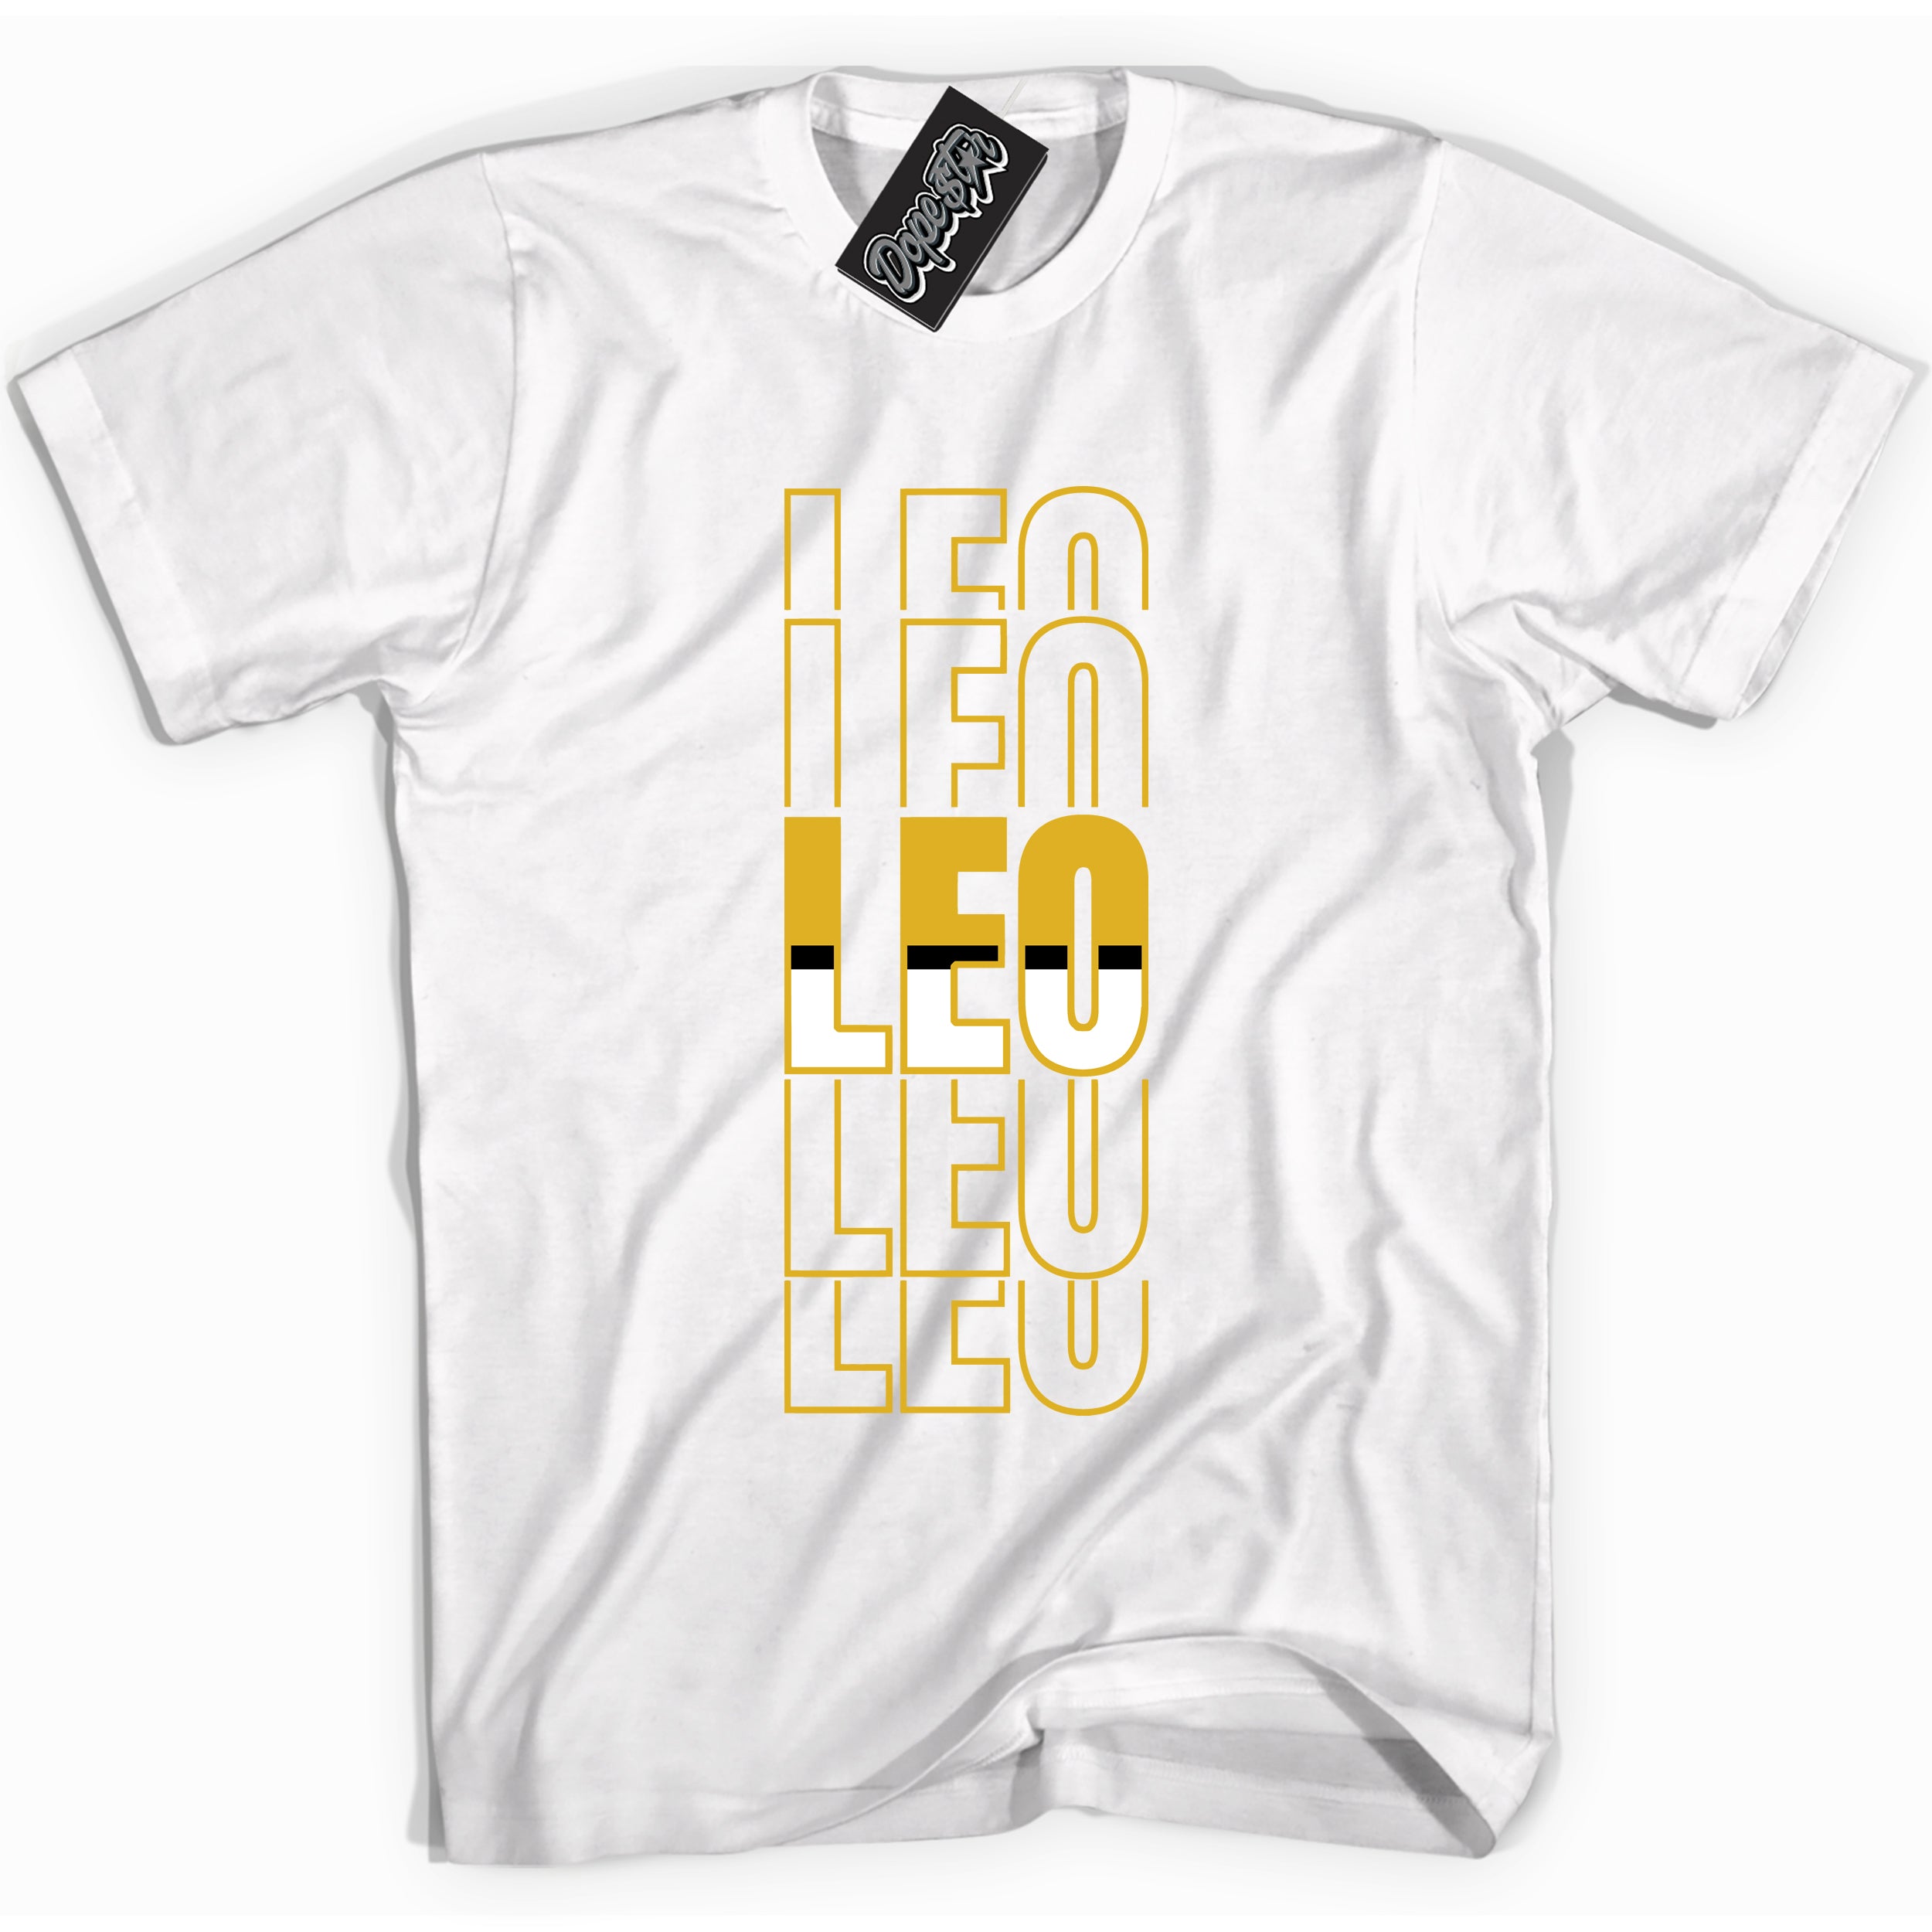 Cool White Shirt with “ Leo” design that perfectly matches Yellow Ochre 6s Sneakers.